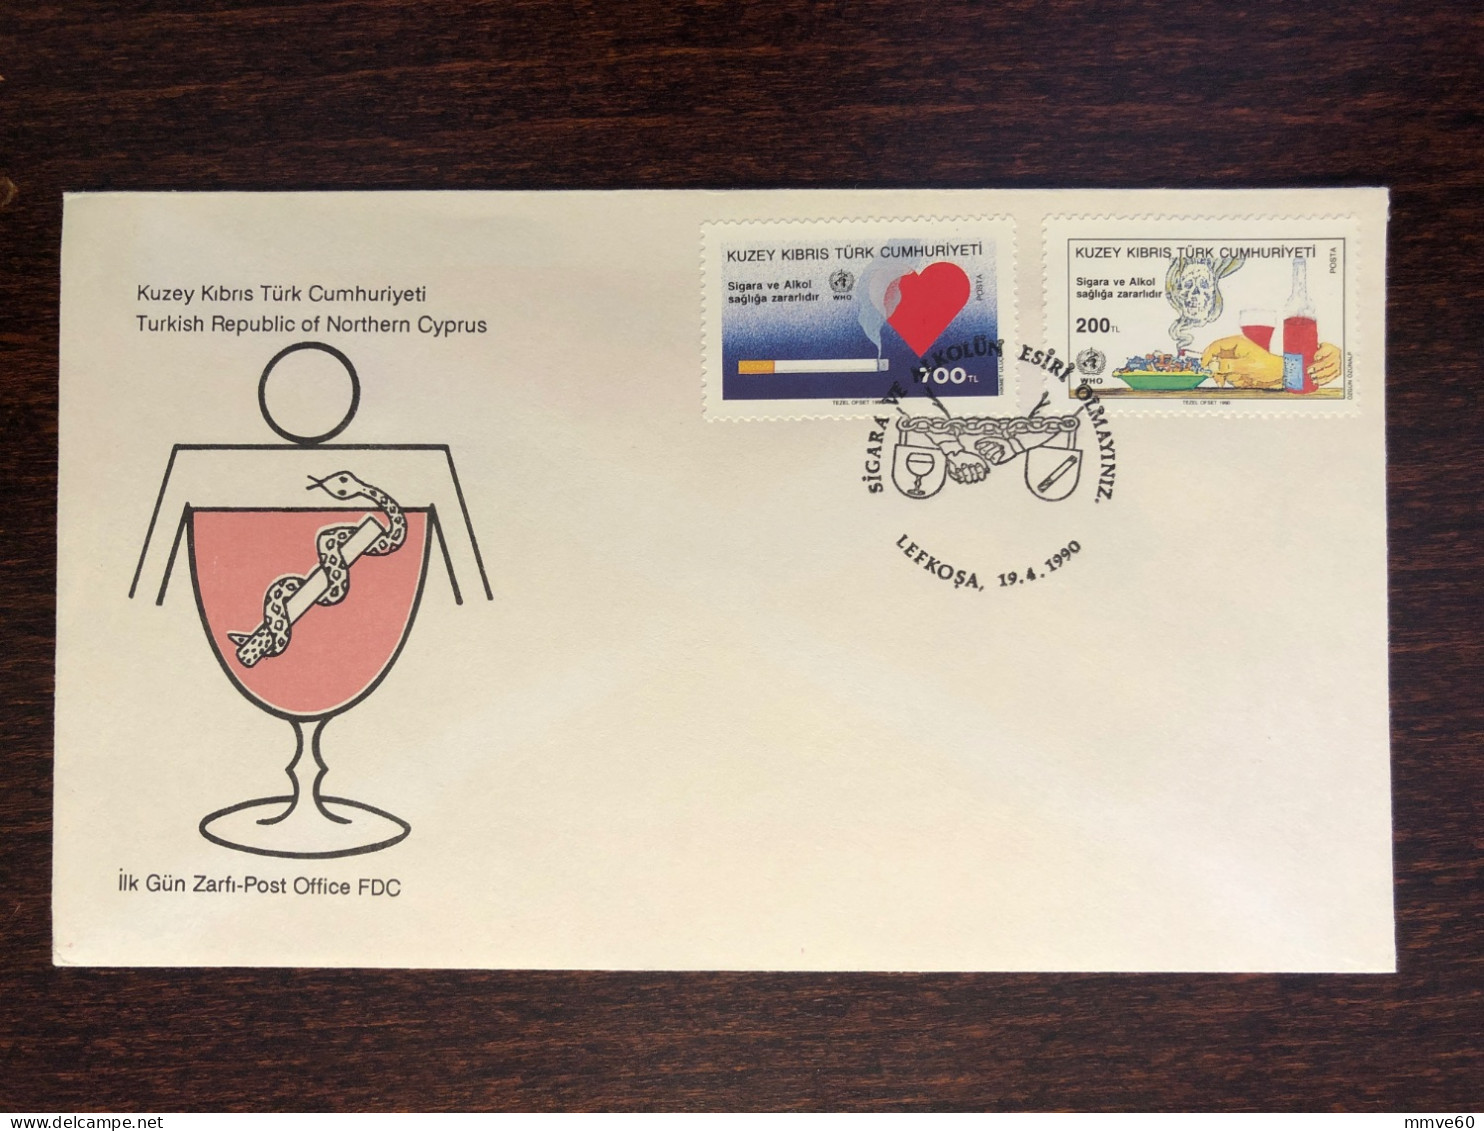 CYPRUS TURKISH FDC COVER 1990 YEAR SMOKING ALCOHOLISM HEALTH MEDICINE STAMPS - Covers & Documents